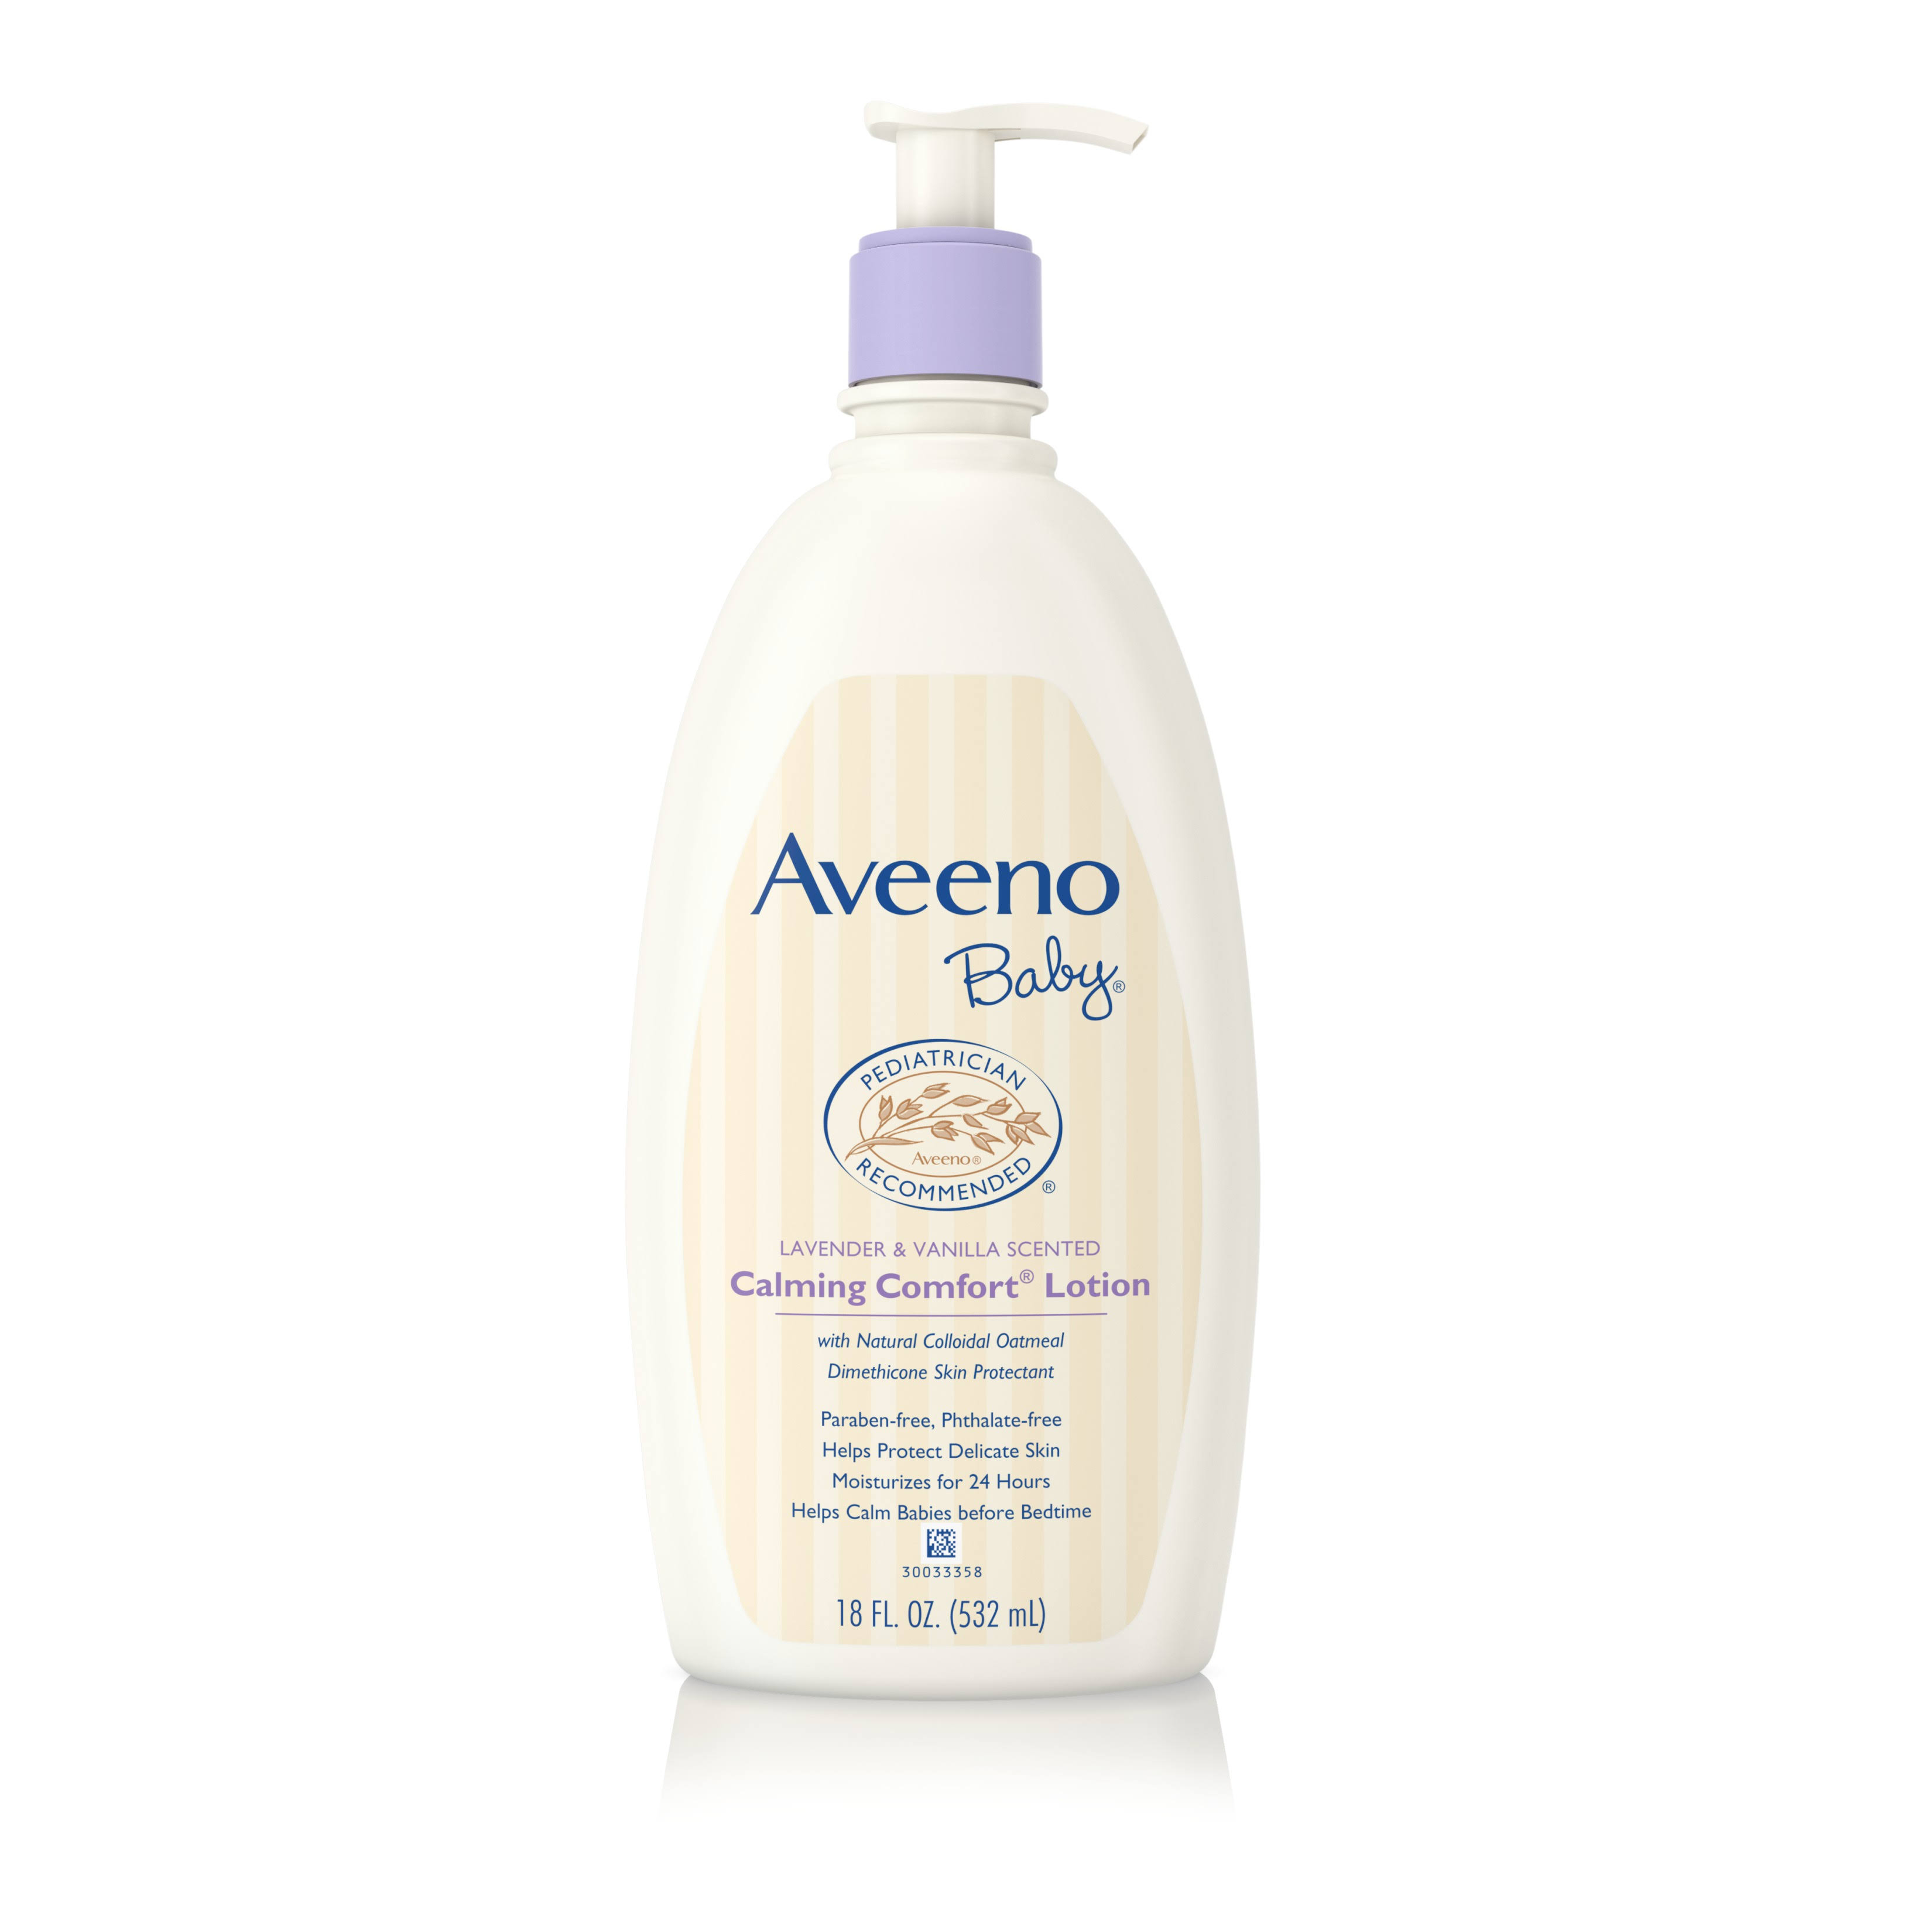 Aveeno Baby Scented Calming Comfort Lotion - Lavender and Vanilla, 180z